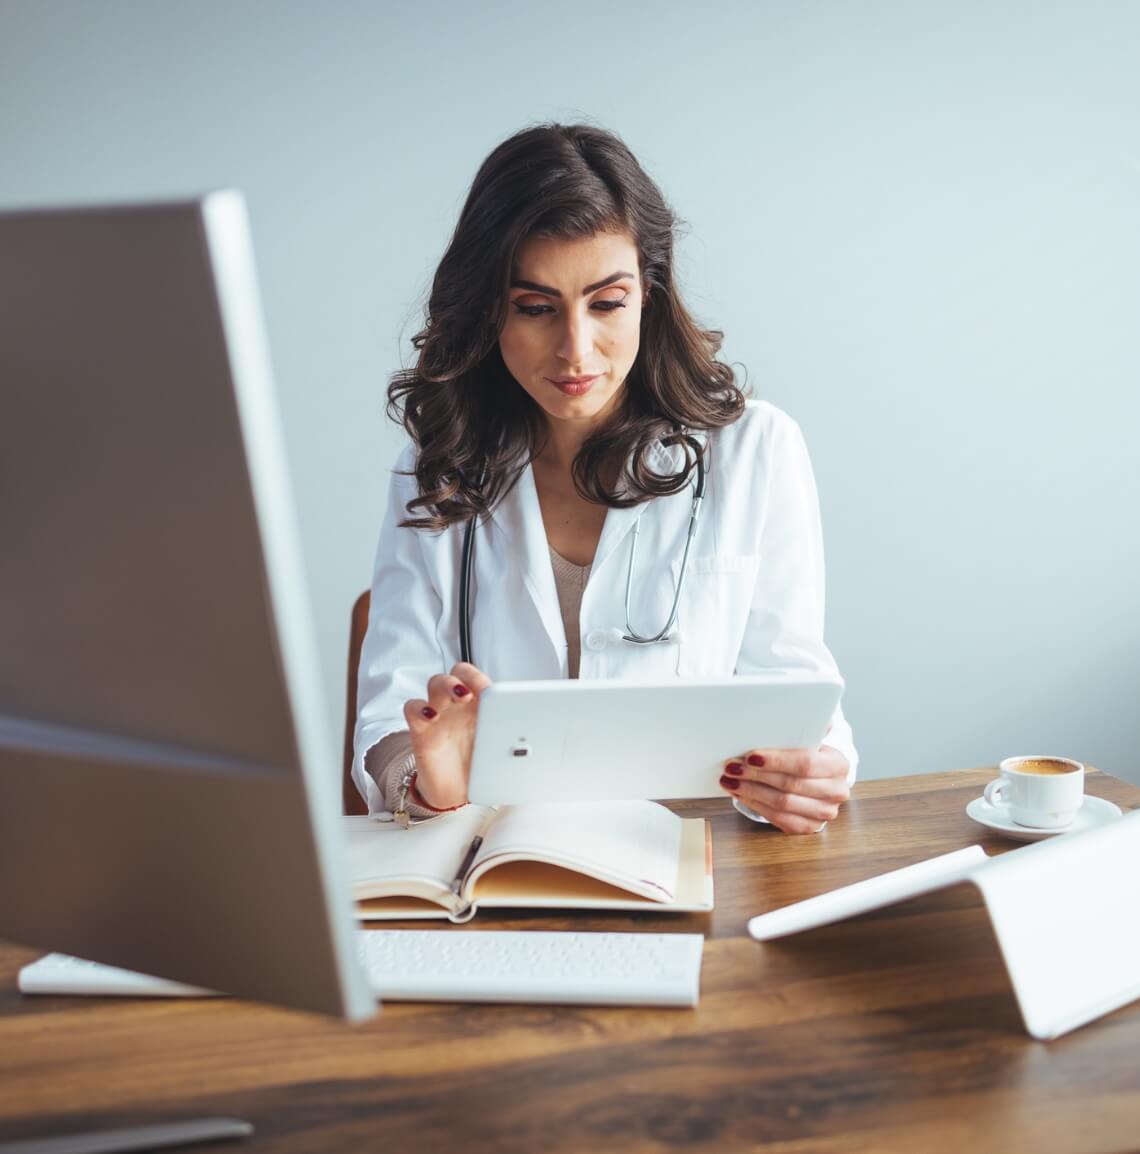 Female medical professional sitting at her desk using a tablet